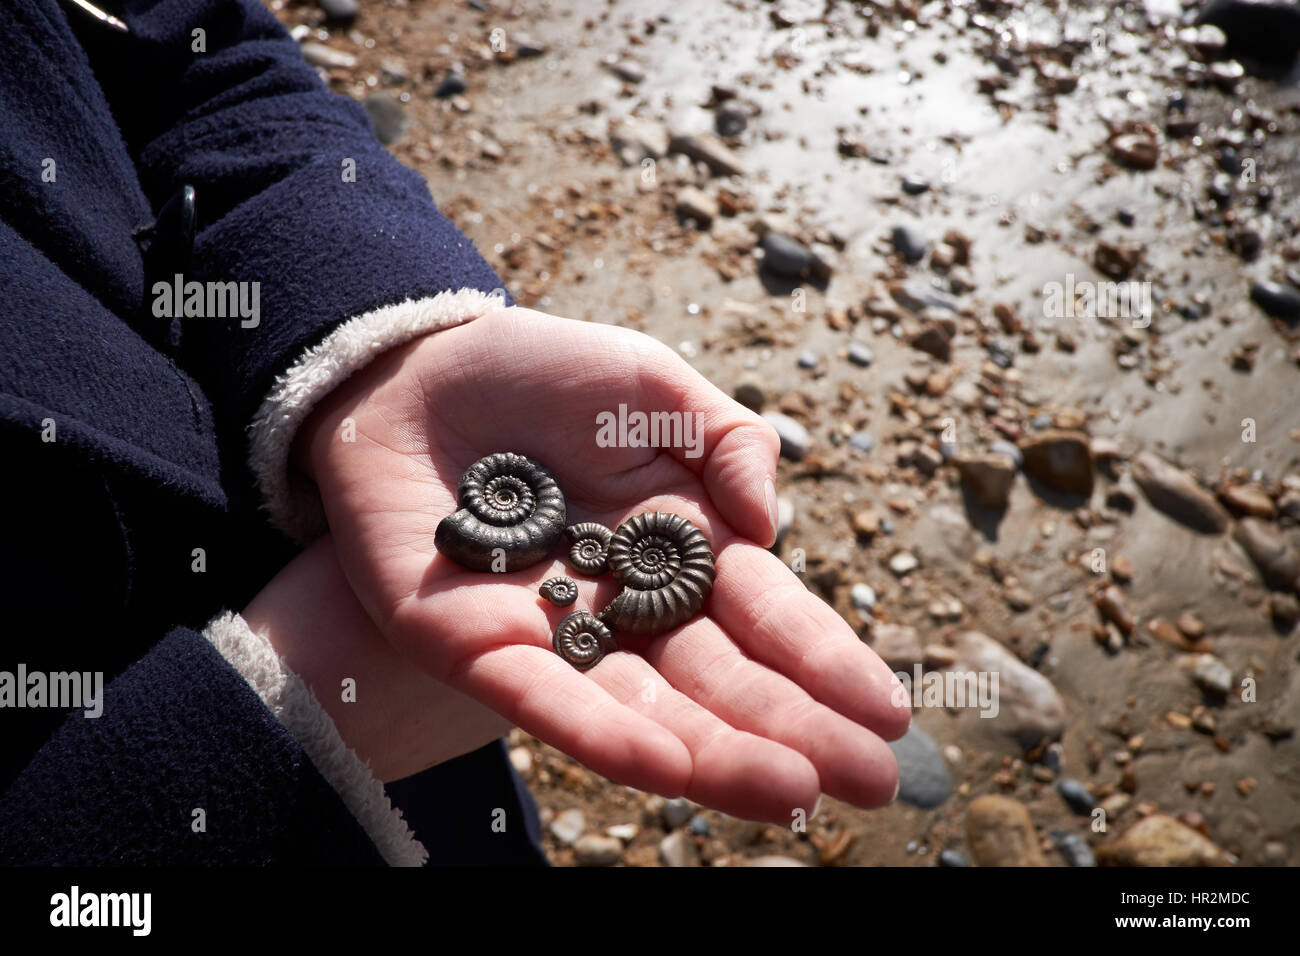 Five ammonites found along the beach held in the hand of a child against the sandy beach Stock Photo